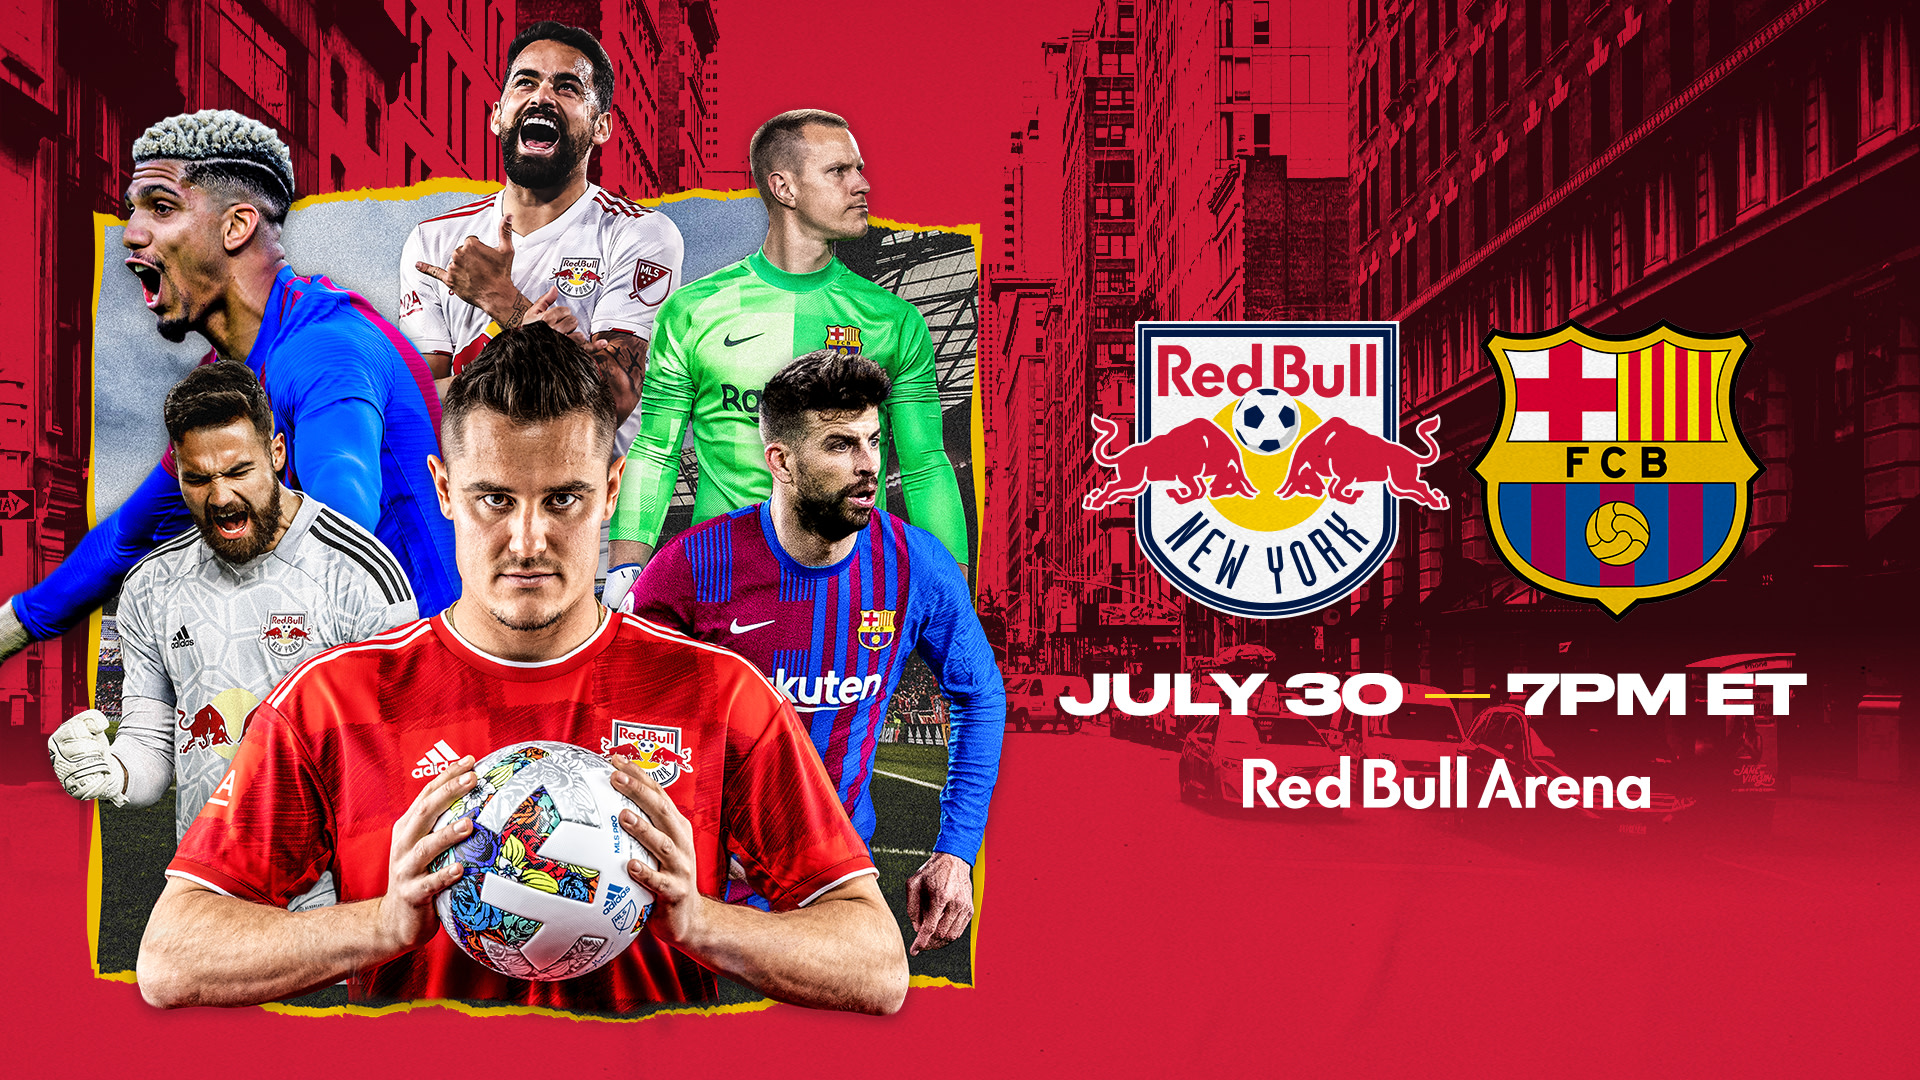 Red Bulls to Host FC Barcelona on July 30 at Red Bull Arena - New York Red Bulls